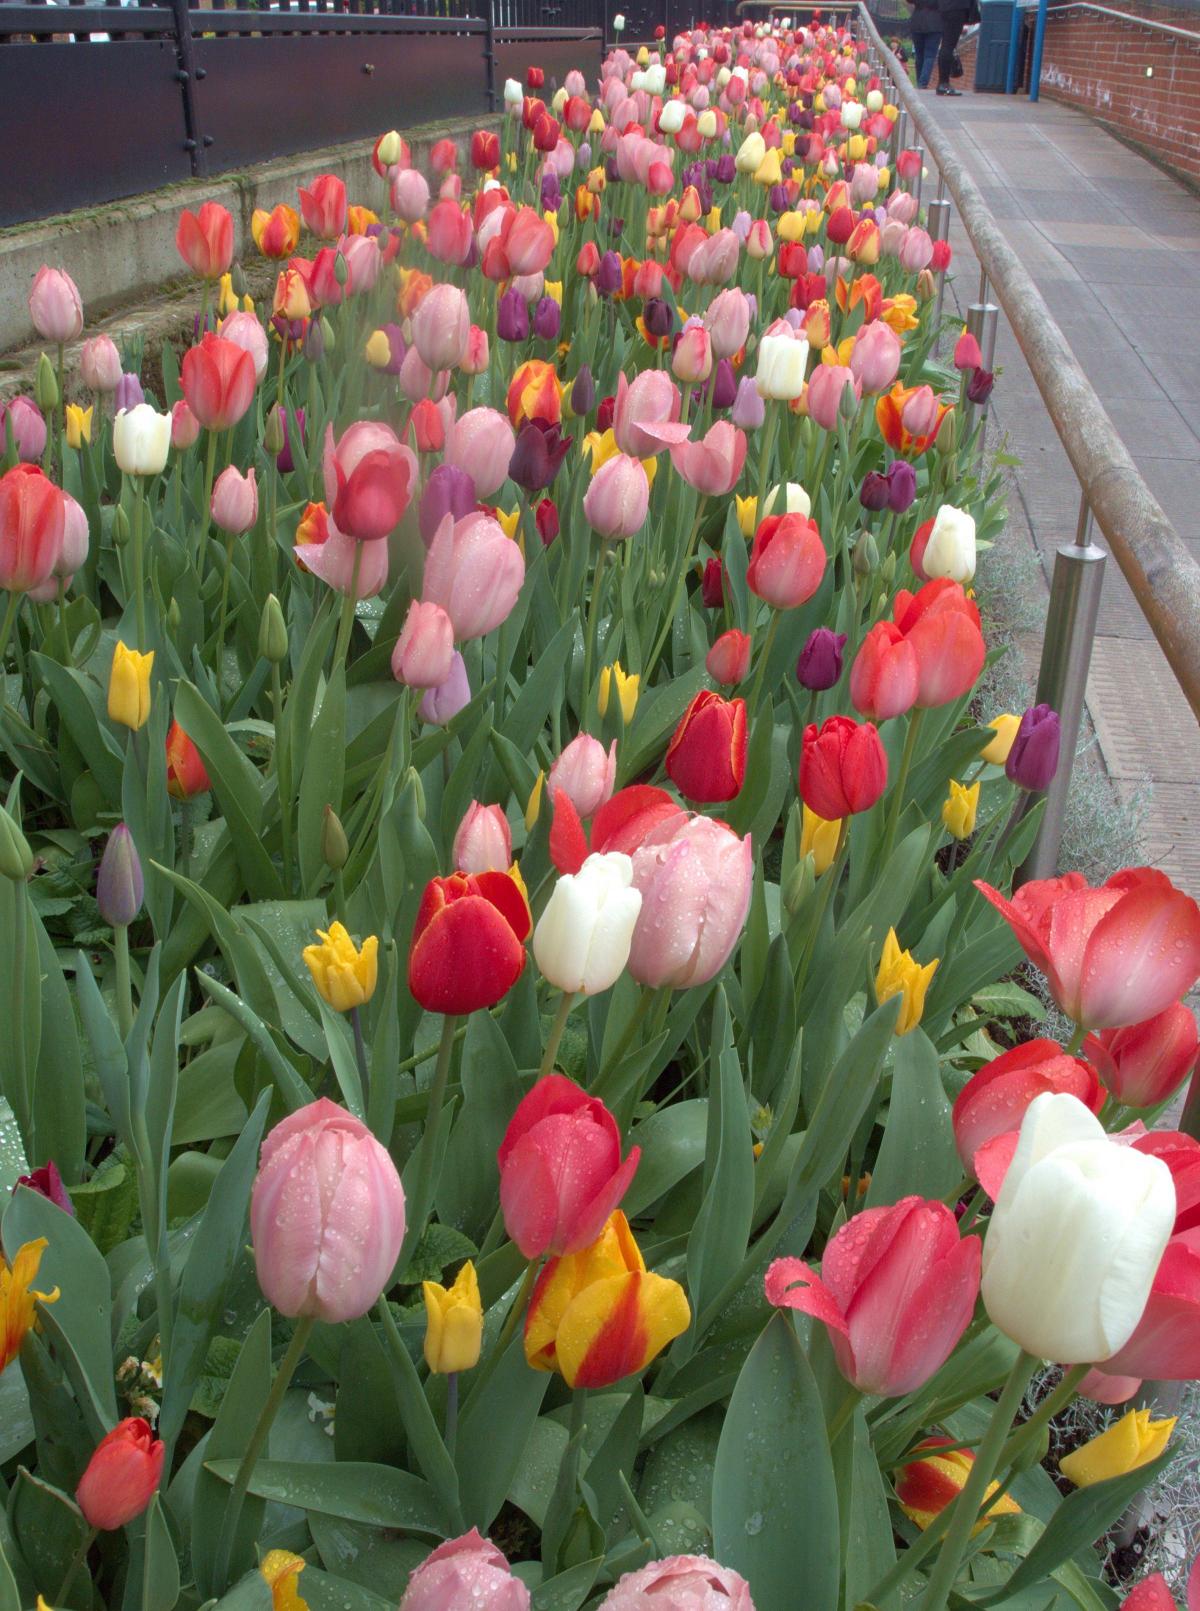 Cancer patient Fred Popplewell took this photo of a "fine display" of tulips outside St George's Hospital in Tooting.